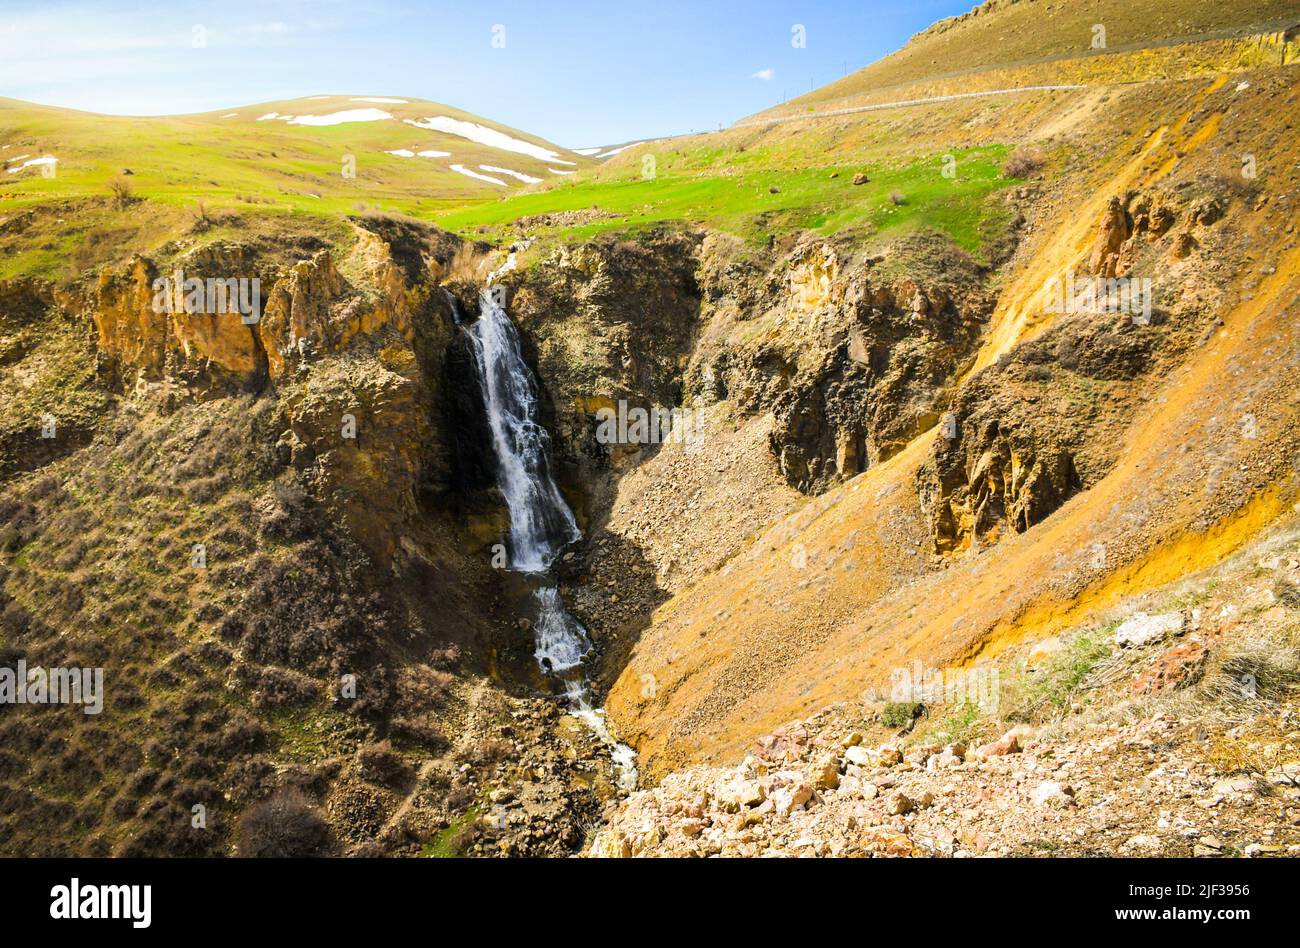 Susuz Waterfall in Kars Province of Turkey with beautiful green spring nature Stock Photo